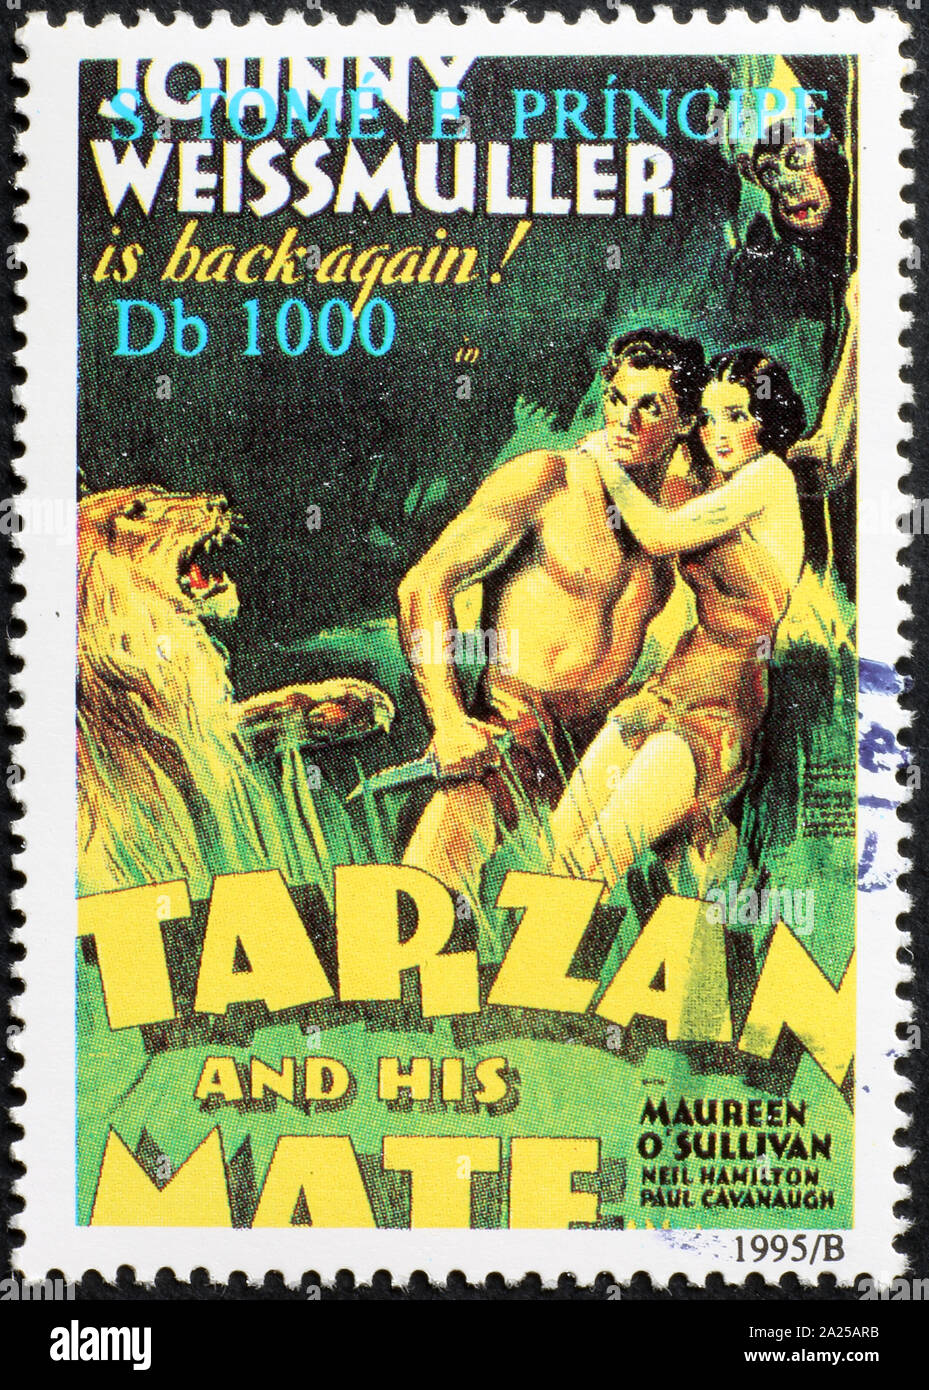 Johnny Weissmuller in Tarzan and His Mate & the Edgar Rice Burroughs stamp 